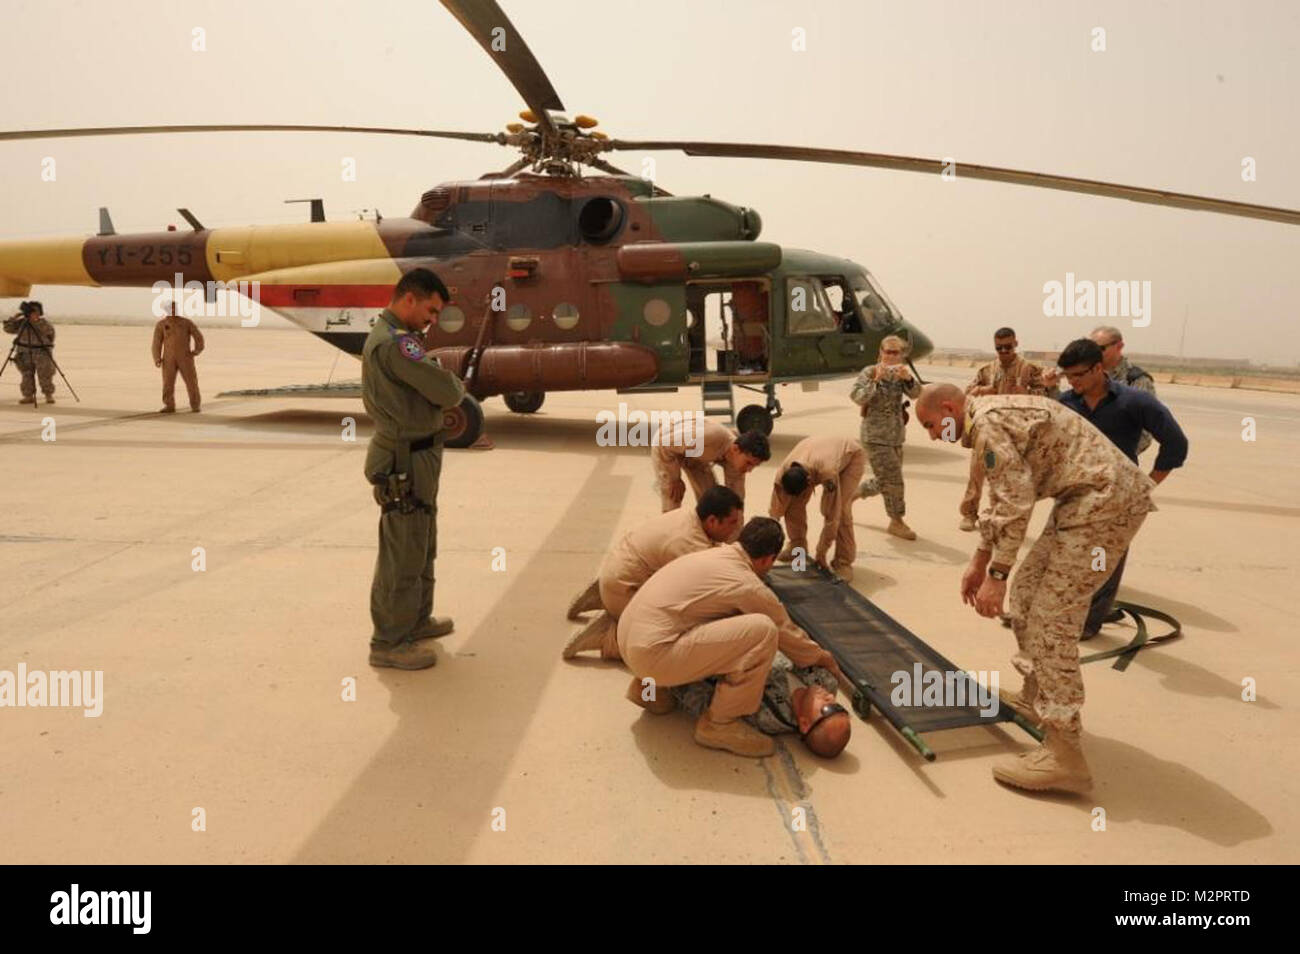 IRAQ, BIAP. Joint MEdevac training at BIAP between the Iraqi Air Force 2nd and 4th Squadron (UH-1, Mi17) crewmembers with 171 GSAB's C Co 3-126 Medevacs crew, and a A Co UH-60 Blackhawk crew flew to BIAP where the Iraqi's trained themselves Medevac procedures, and the US demonstrated to Iraqi's their Medevac equipment on the 'M' model UH-60 MEDEVAC helicopter.  US Airforce personnel facilitated the training at BIAP and participated in the training as well. (Photos by SPC Michael Uribe, 171 GSAB HHC Co.) Contact Michael@imageacquisitions.com Iraqi Air Force by United States Forces - Iraq (Inact Stock Photo